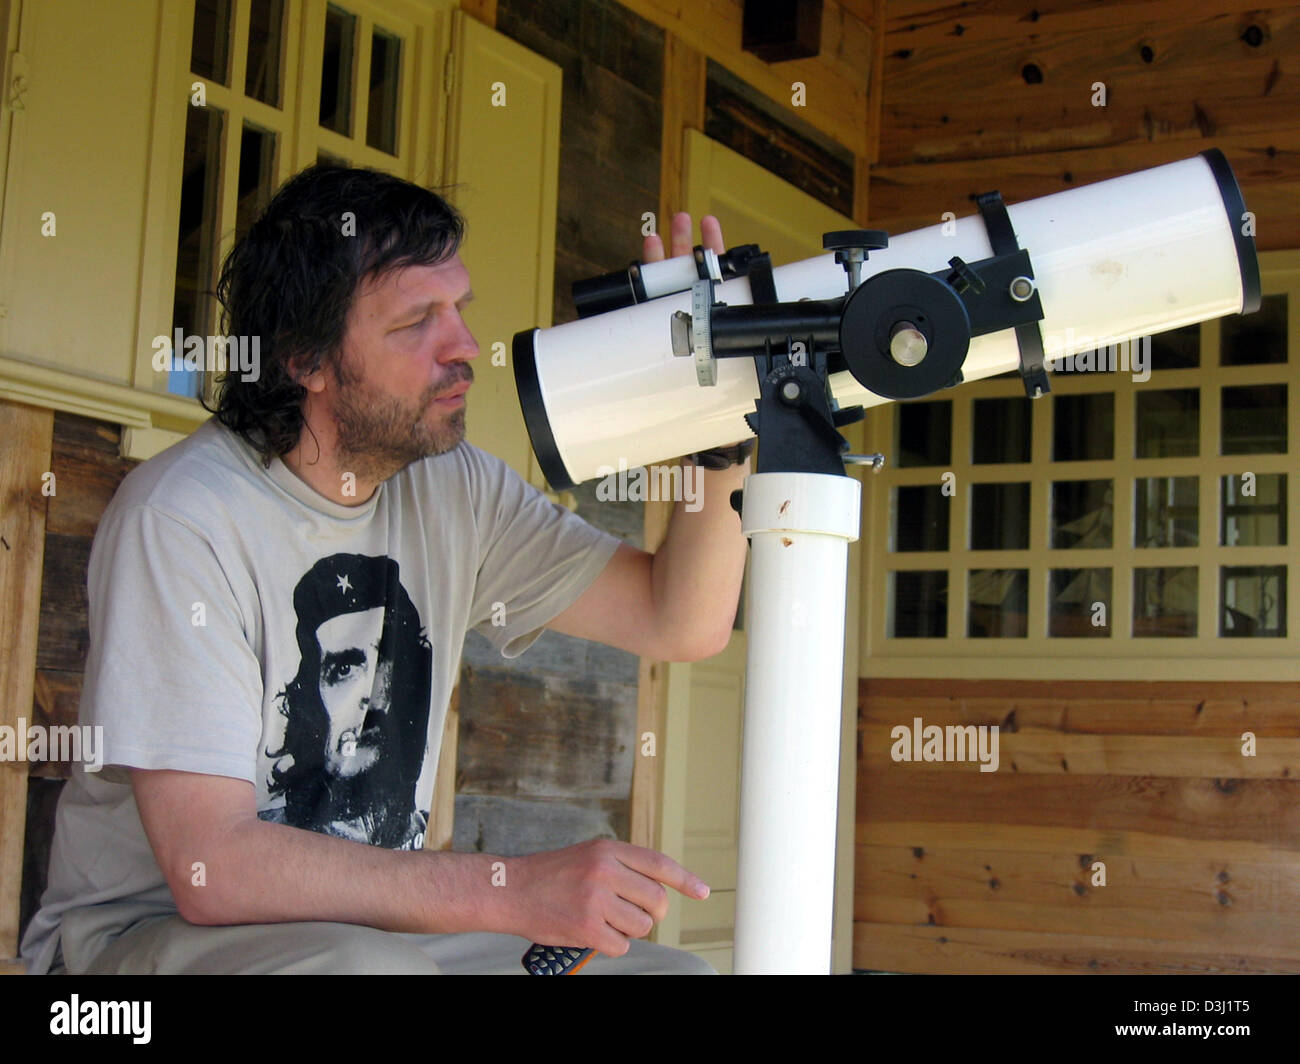 (dpa) - Bosnian film director Emir Kusturica looks through a telescope as he sits on the terrace of his house in the village of 'Kuestendorf', Serbia and Montenegro, 29 May 2005. Kusturica founded and built the village of 'Kuestendorf' as a centre for culture and science in the Serbian mountains. In its simplicity and humility the village is ment to represent an alternative counter Stock Photo